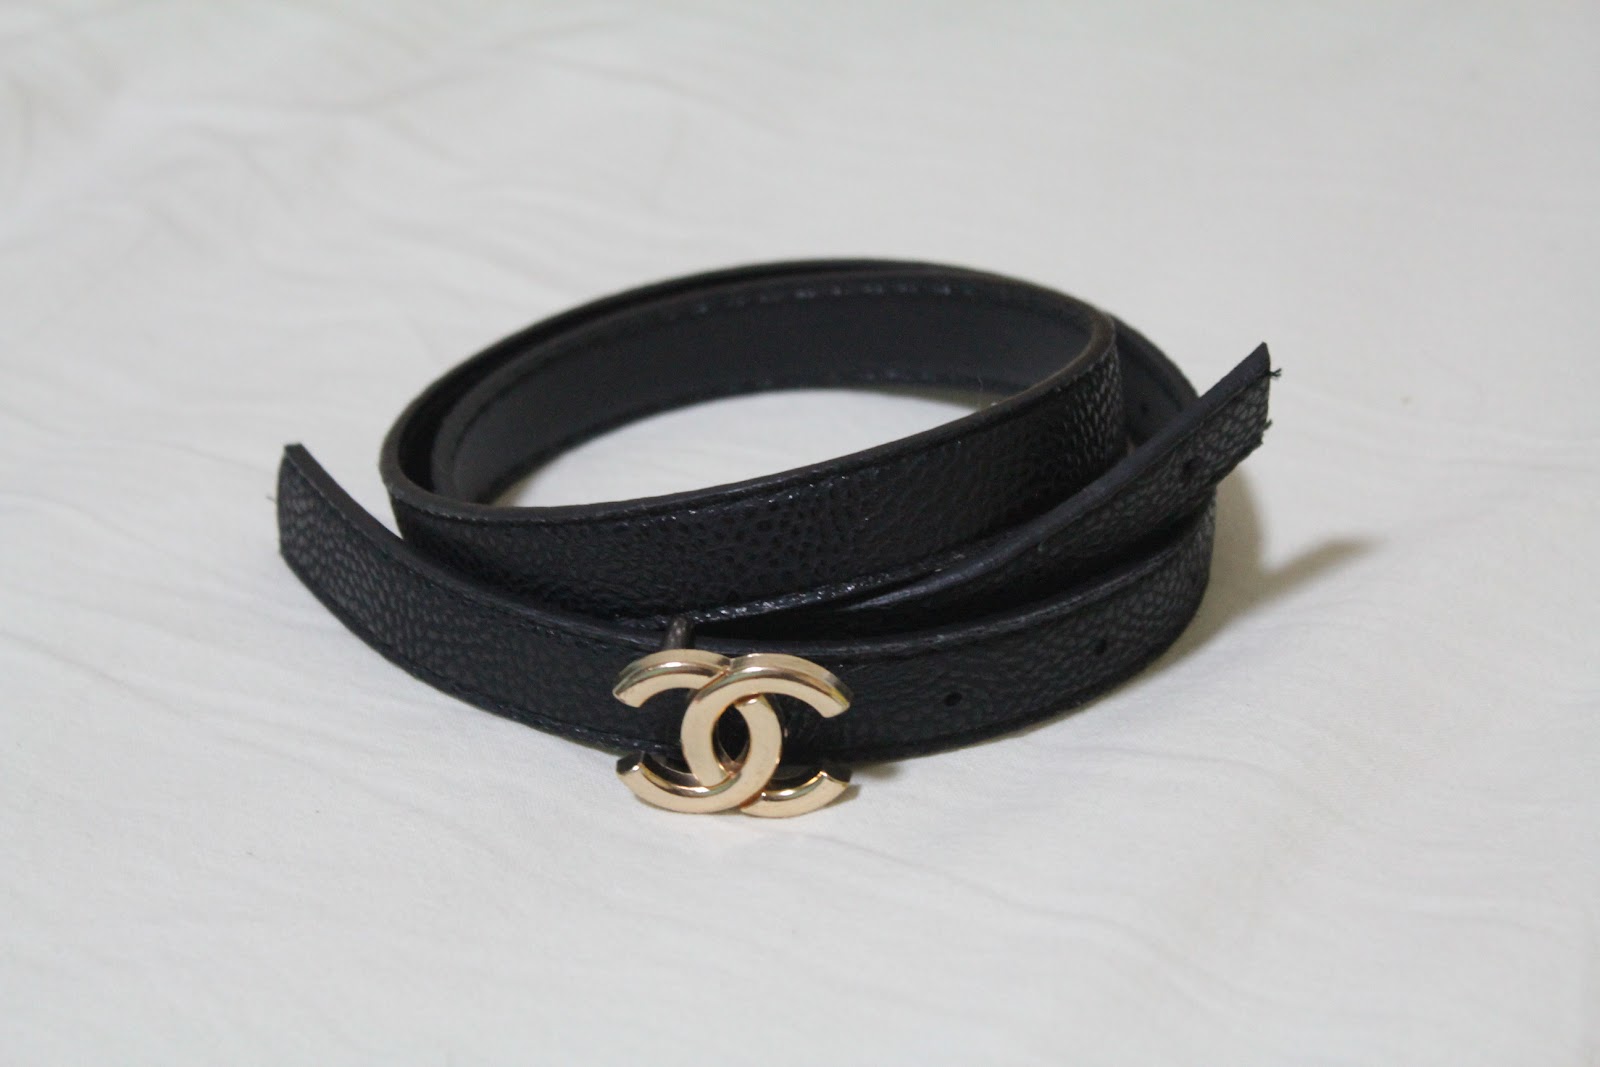 Discover a Chanel Bracelet in Iconic Brand Motifs